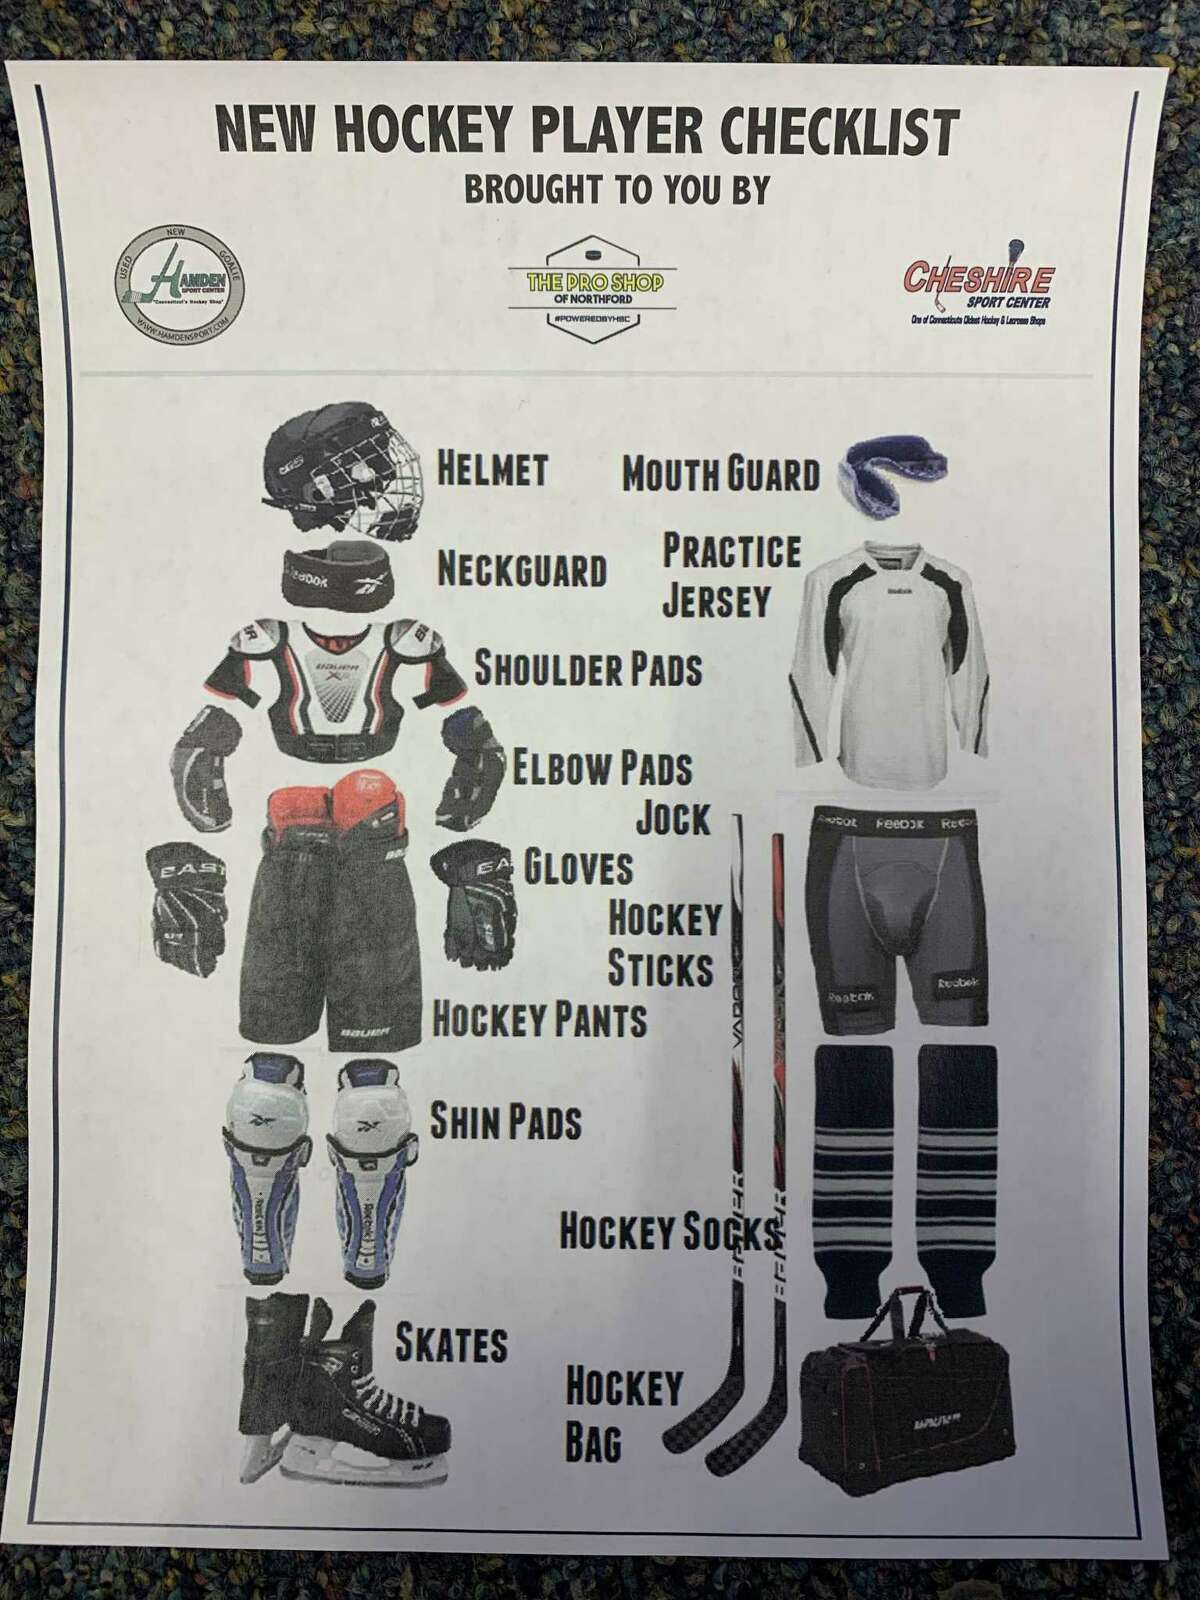 A checklist of equipment for new hockey players that hangs at the Hamden Sports Center, Hamden,